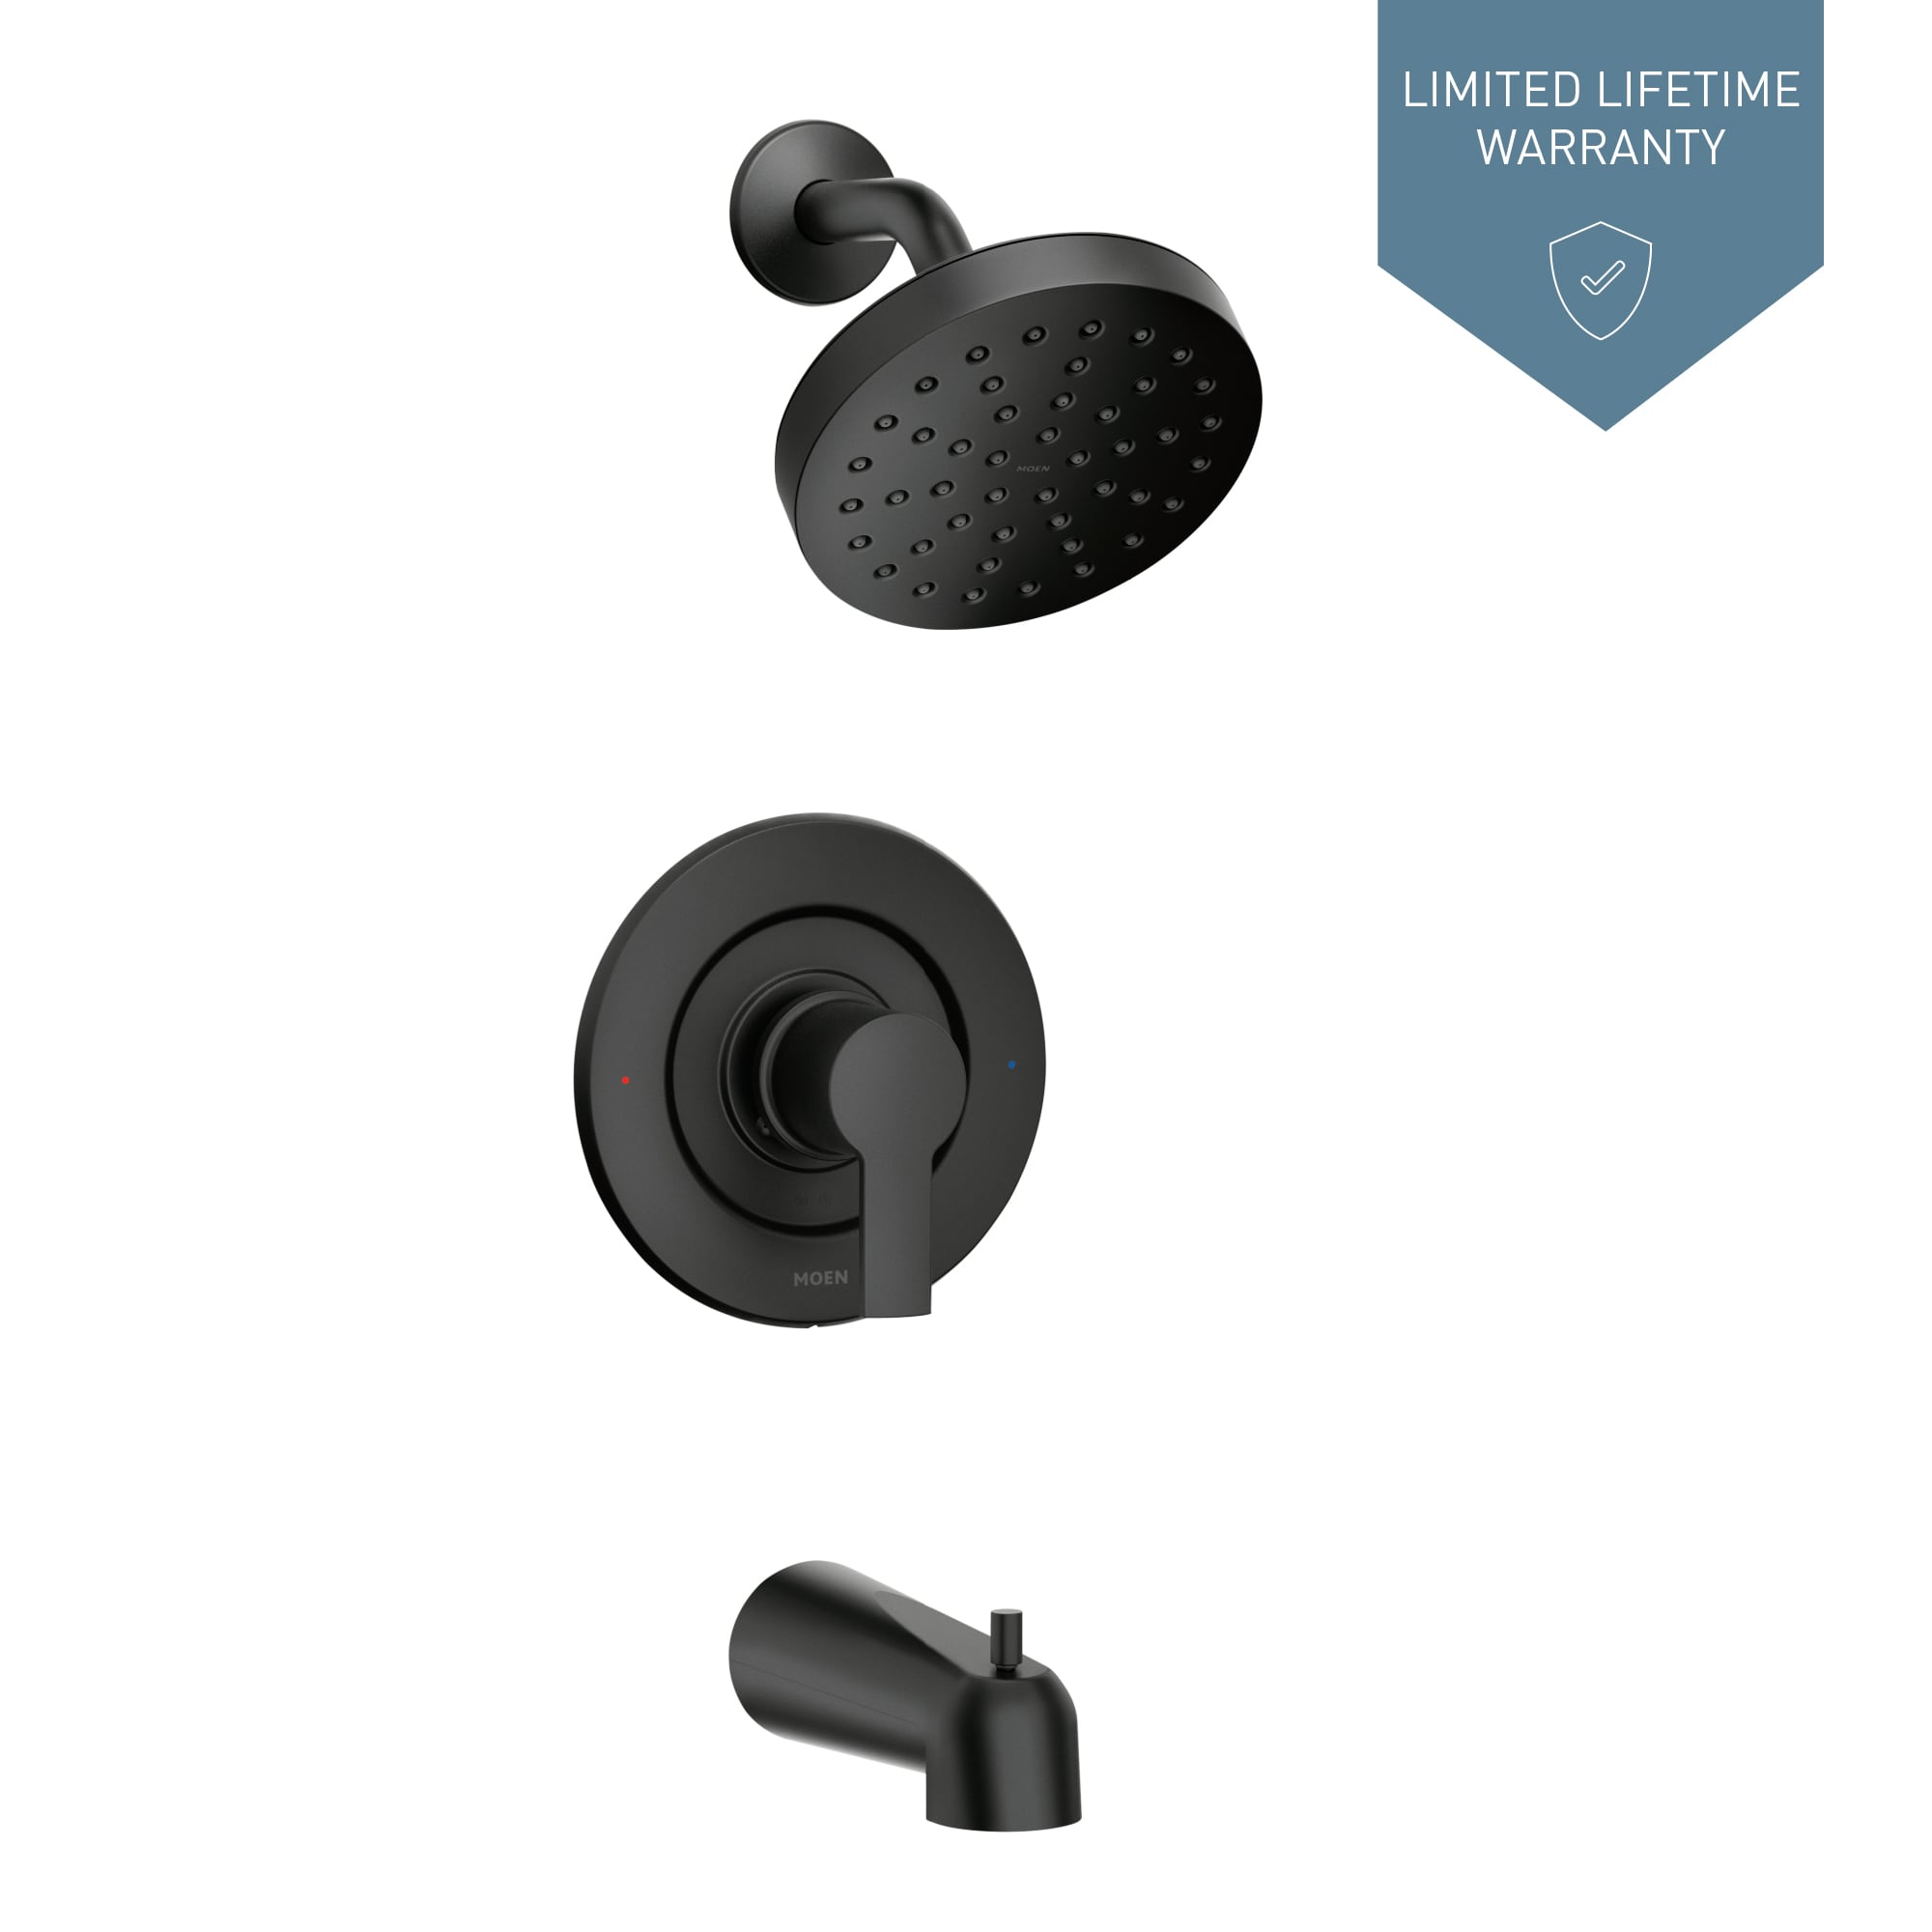 Moen Rinza Matte Black 1-handle Single Function Round Bathtub and Shower  Faucet Valve Included